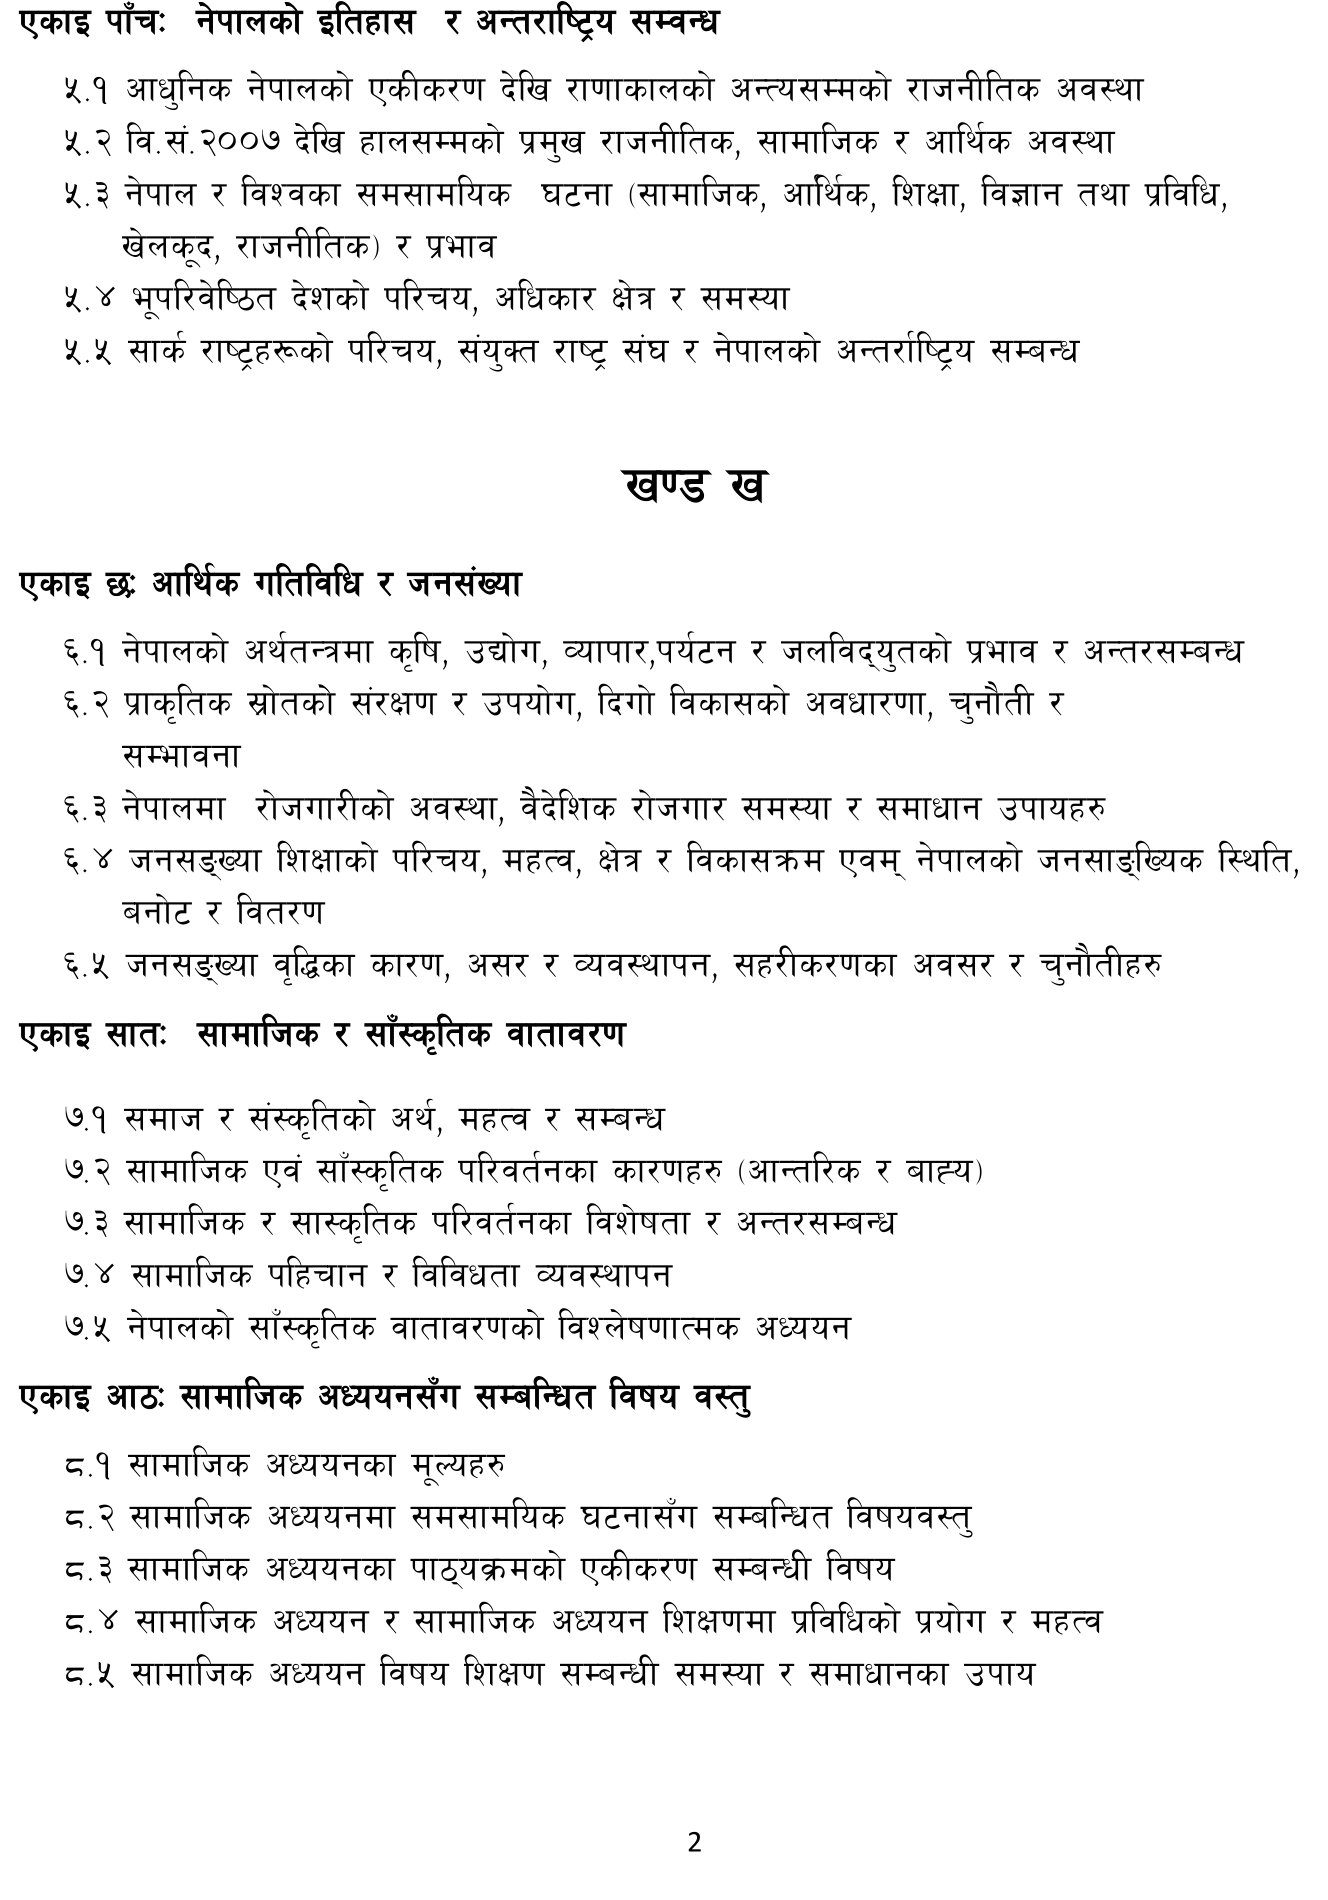 Lower Secondary Level Subject Syllabus of Social Studies Subject